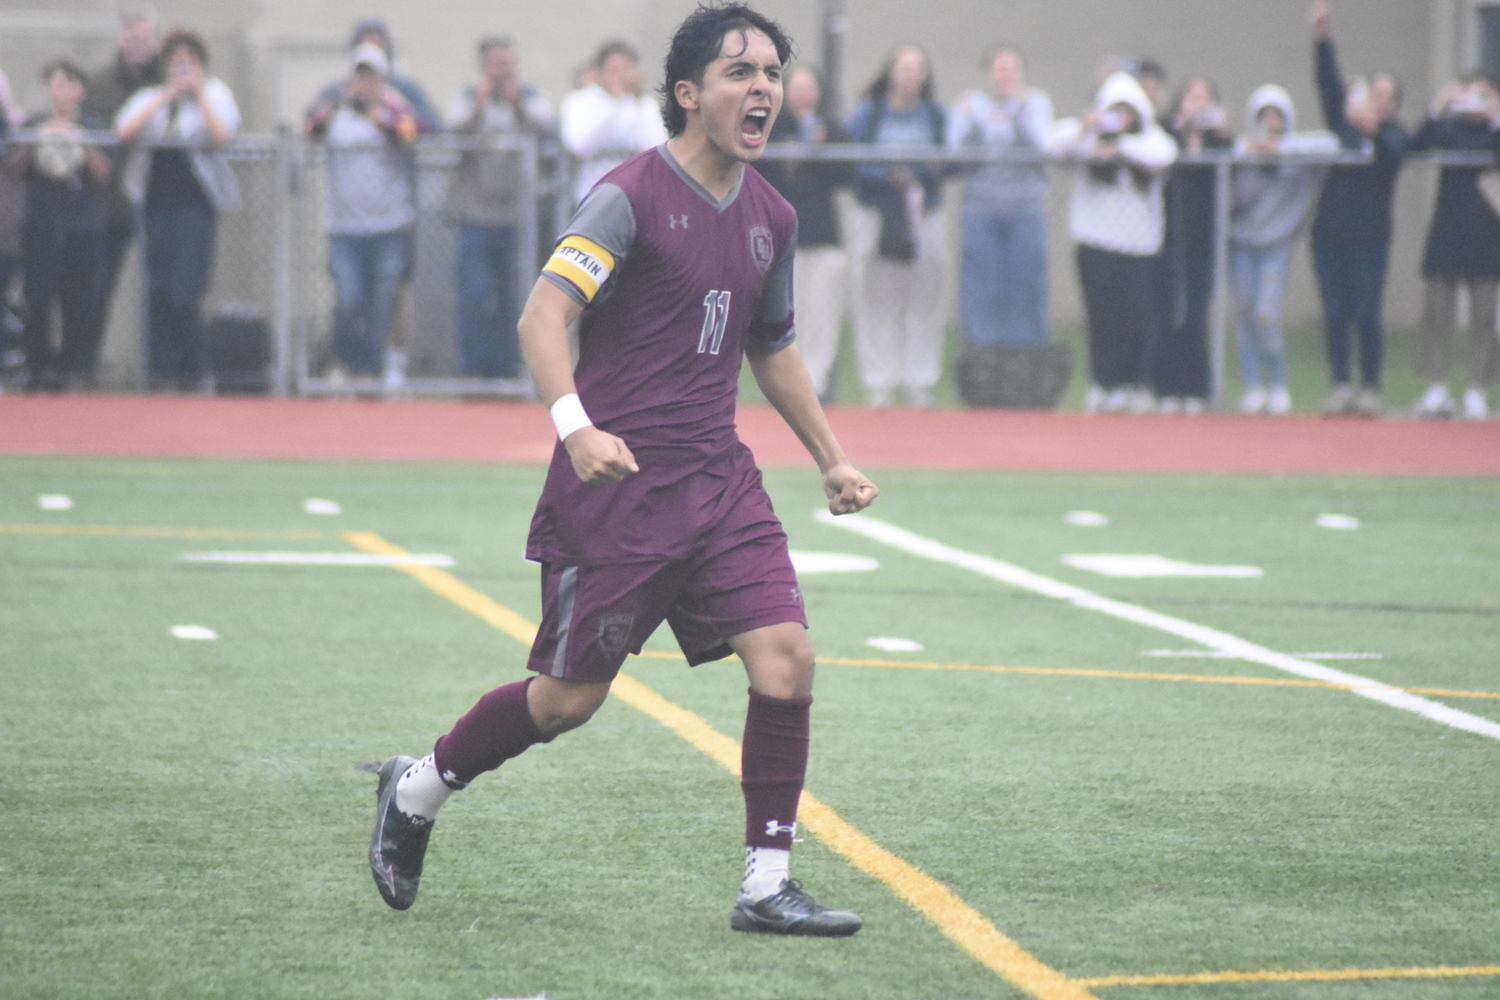 Senior co-captain Gary Gutama reacts after scoring on the first penalty kick for the Bonackers.  DREW BUDD